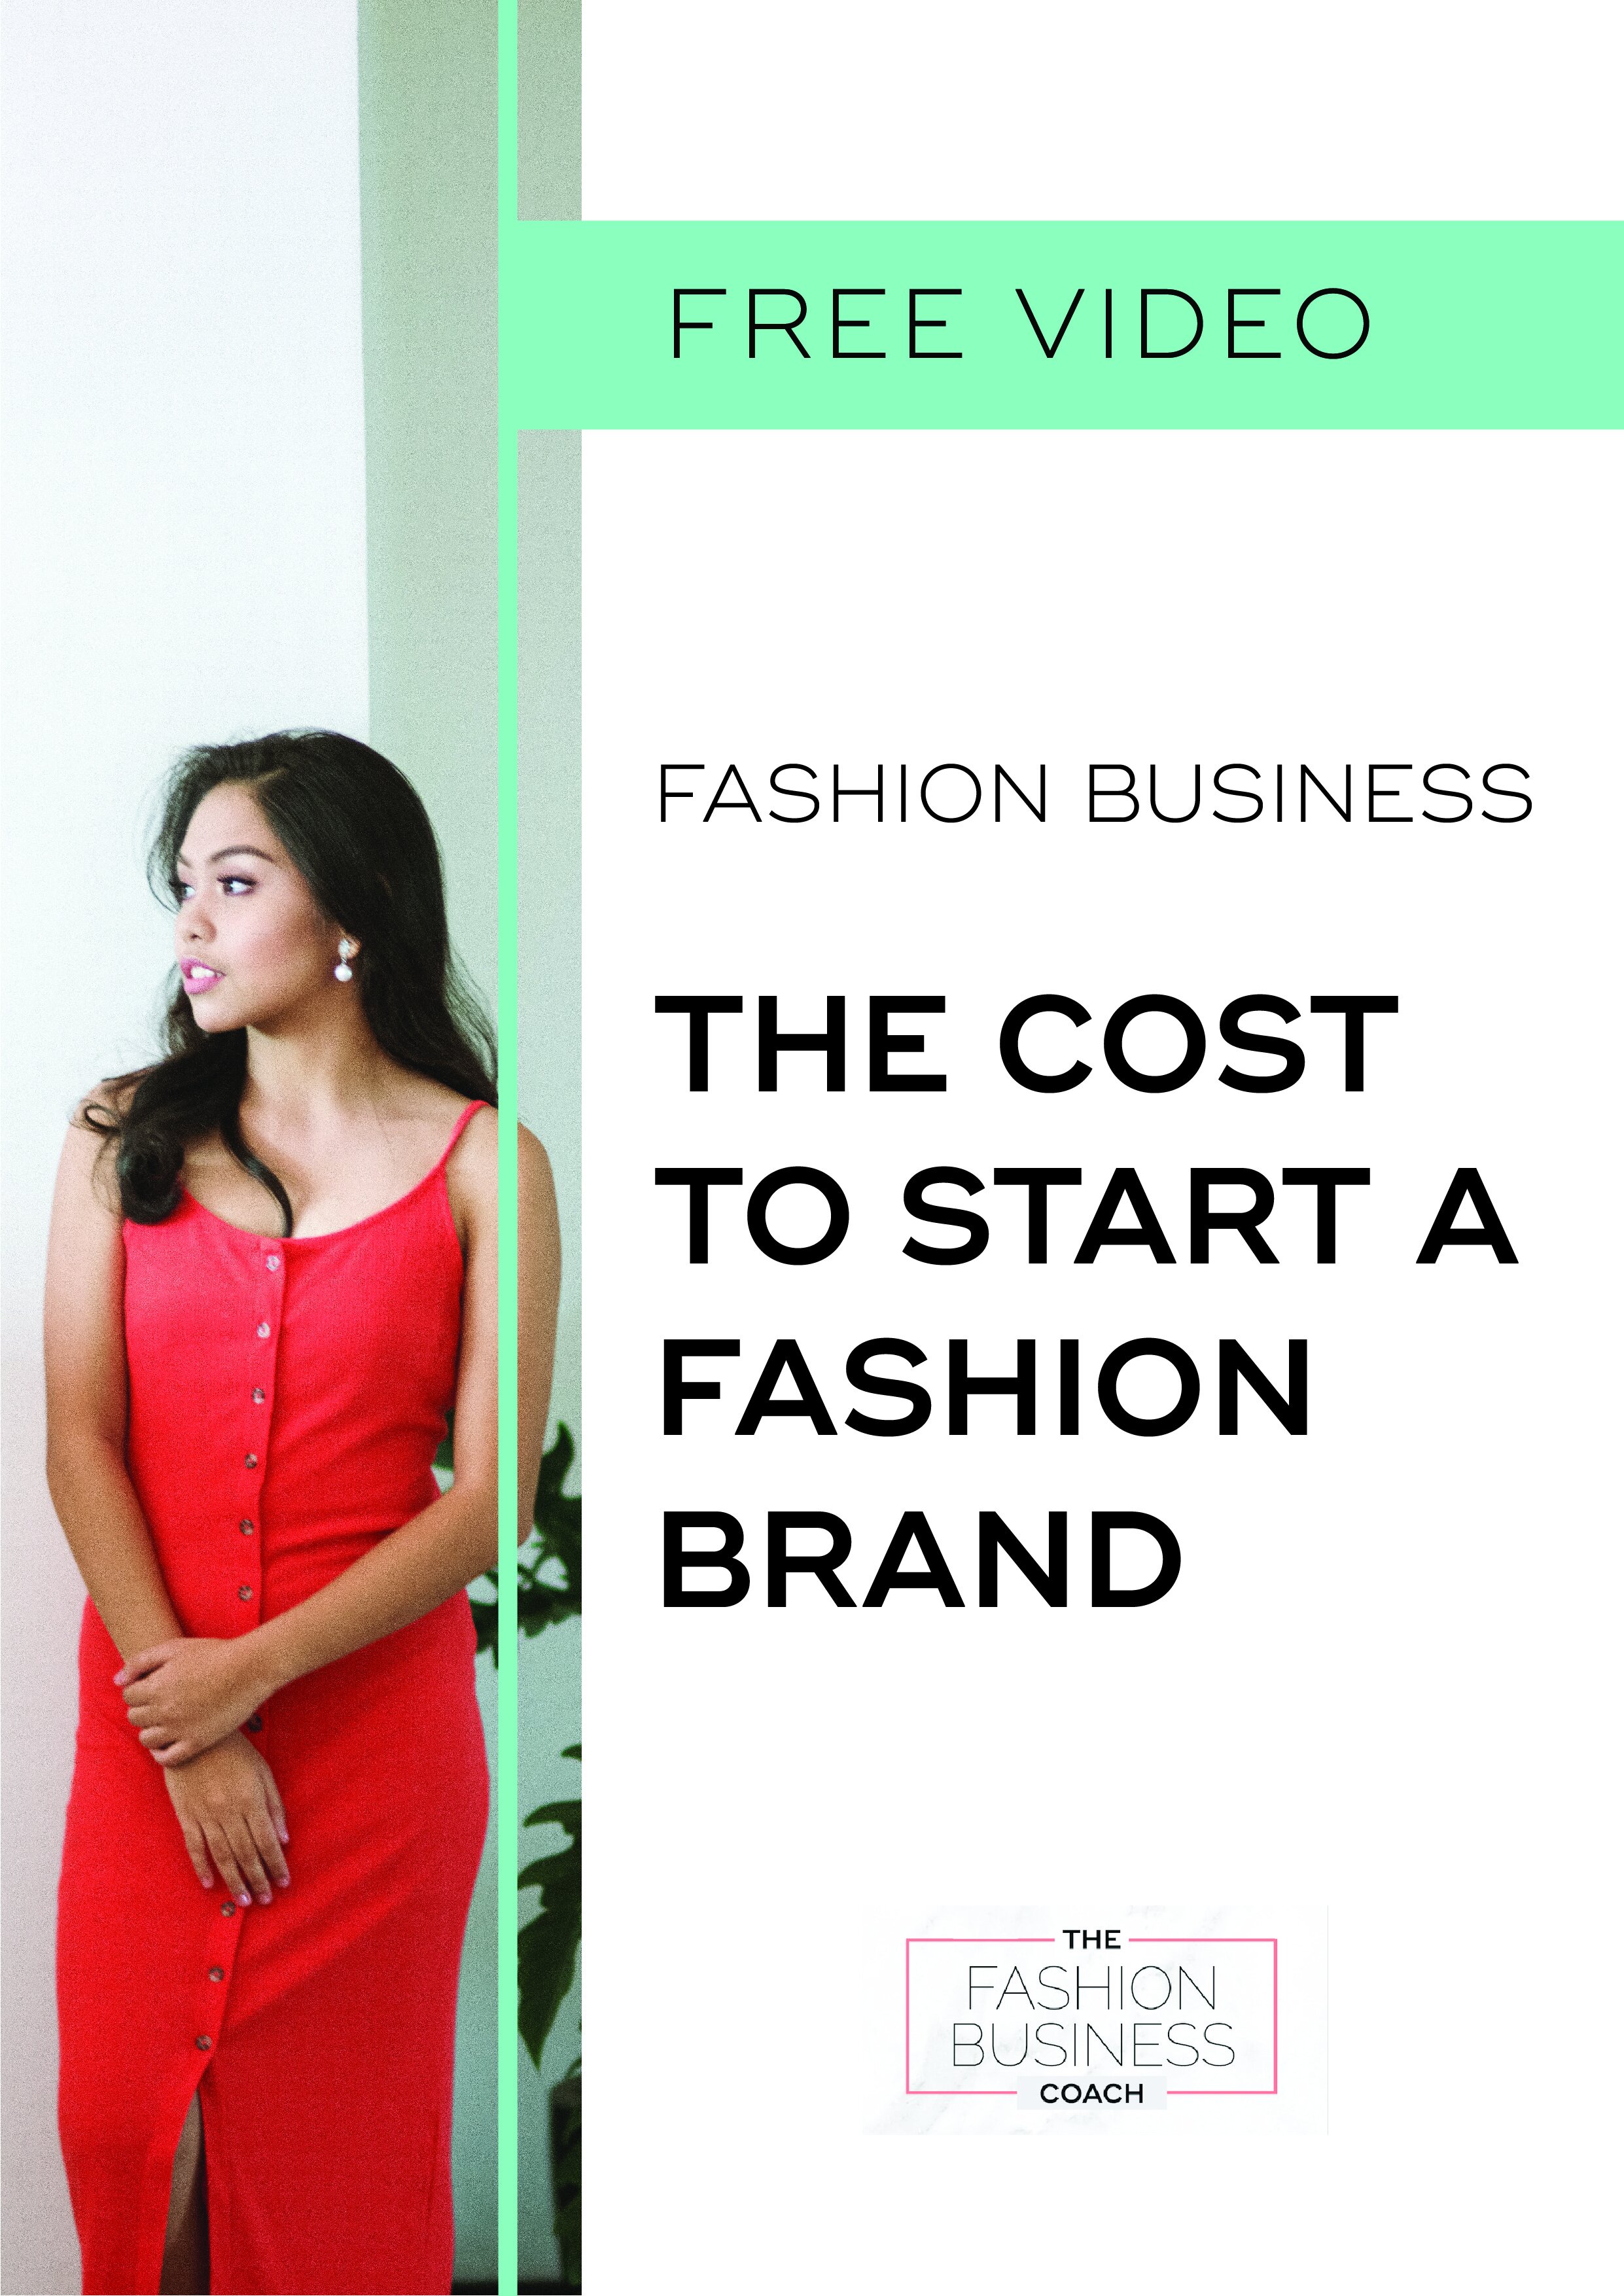 Fashion Business The Cost to Start a Fashion Brand 2.jpg